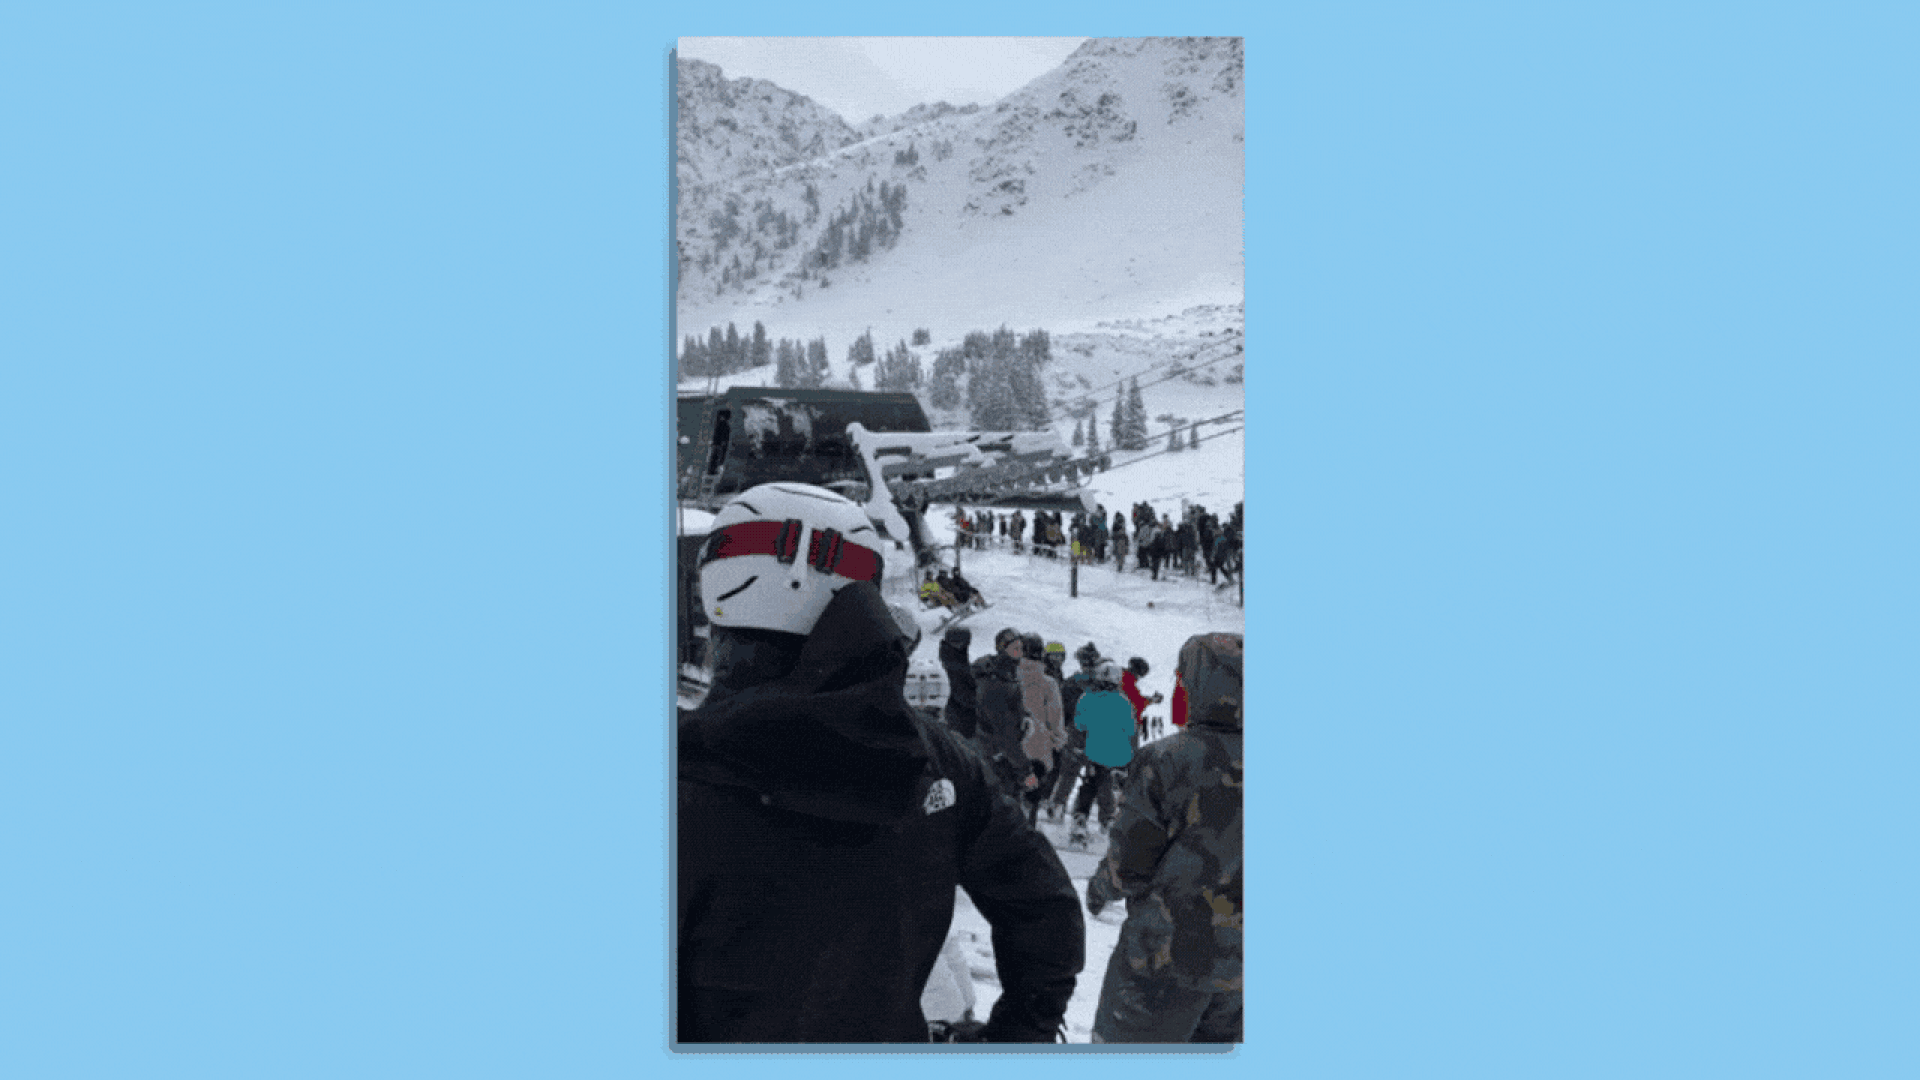 Gif of a crowd of people waiting to ski.